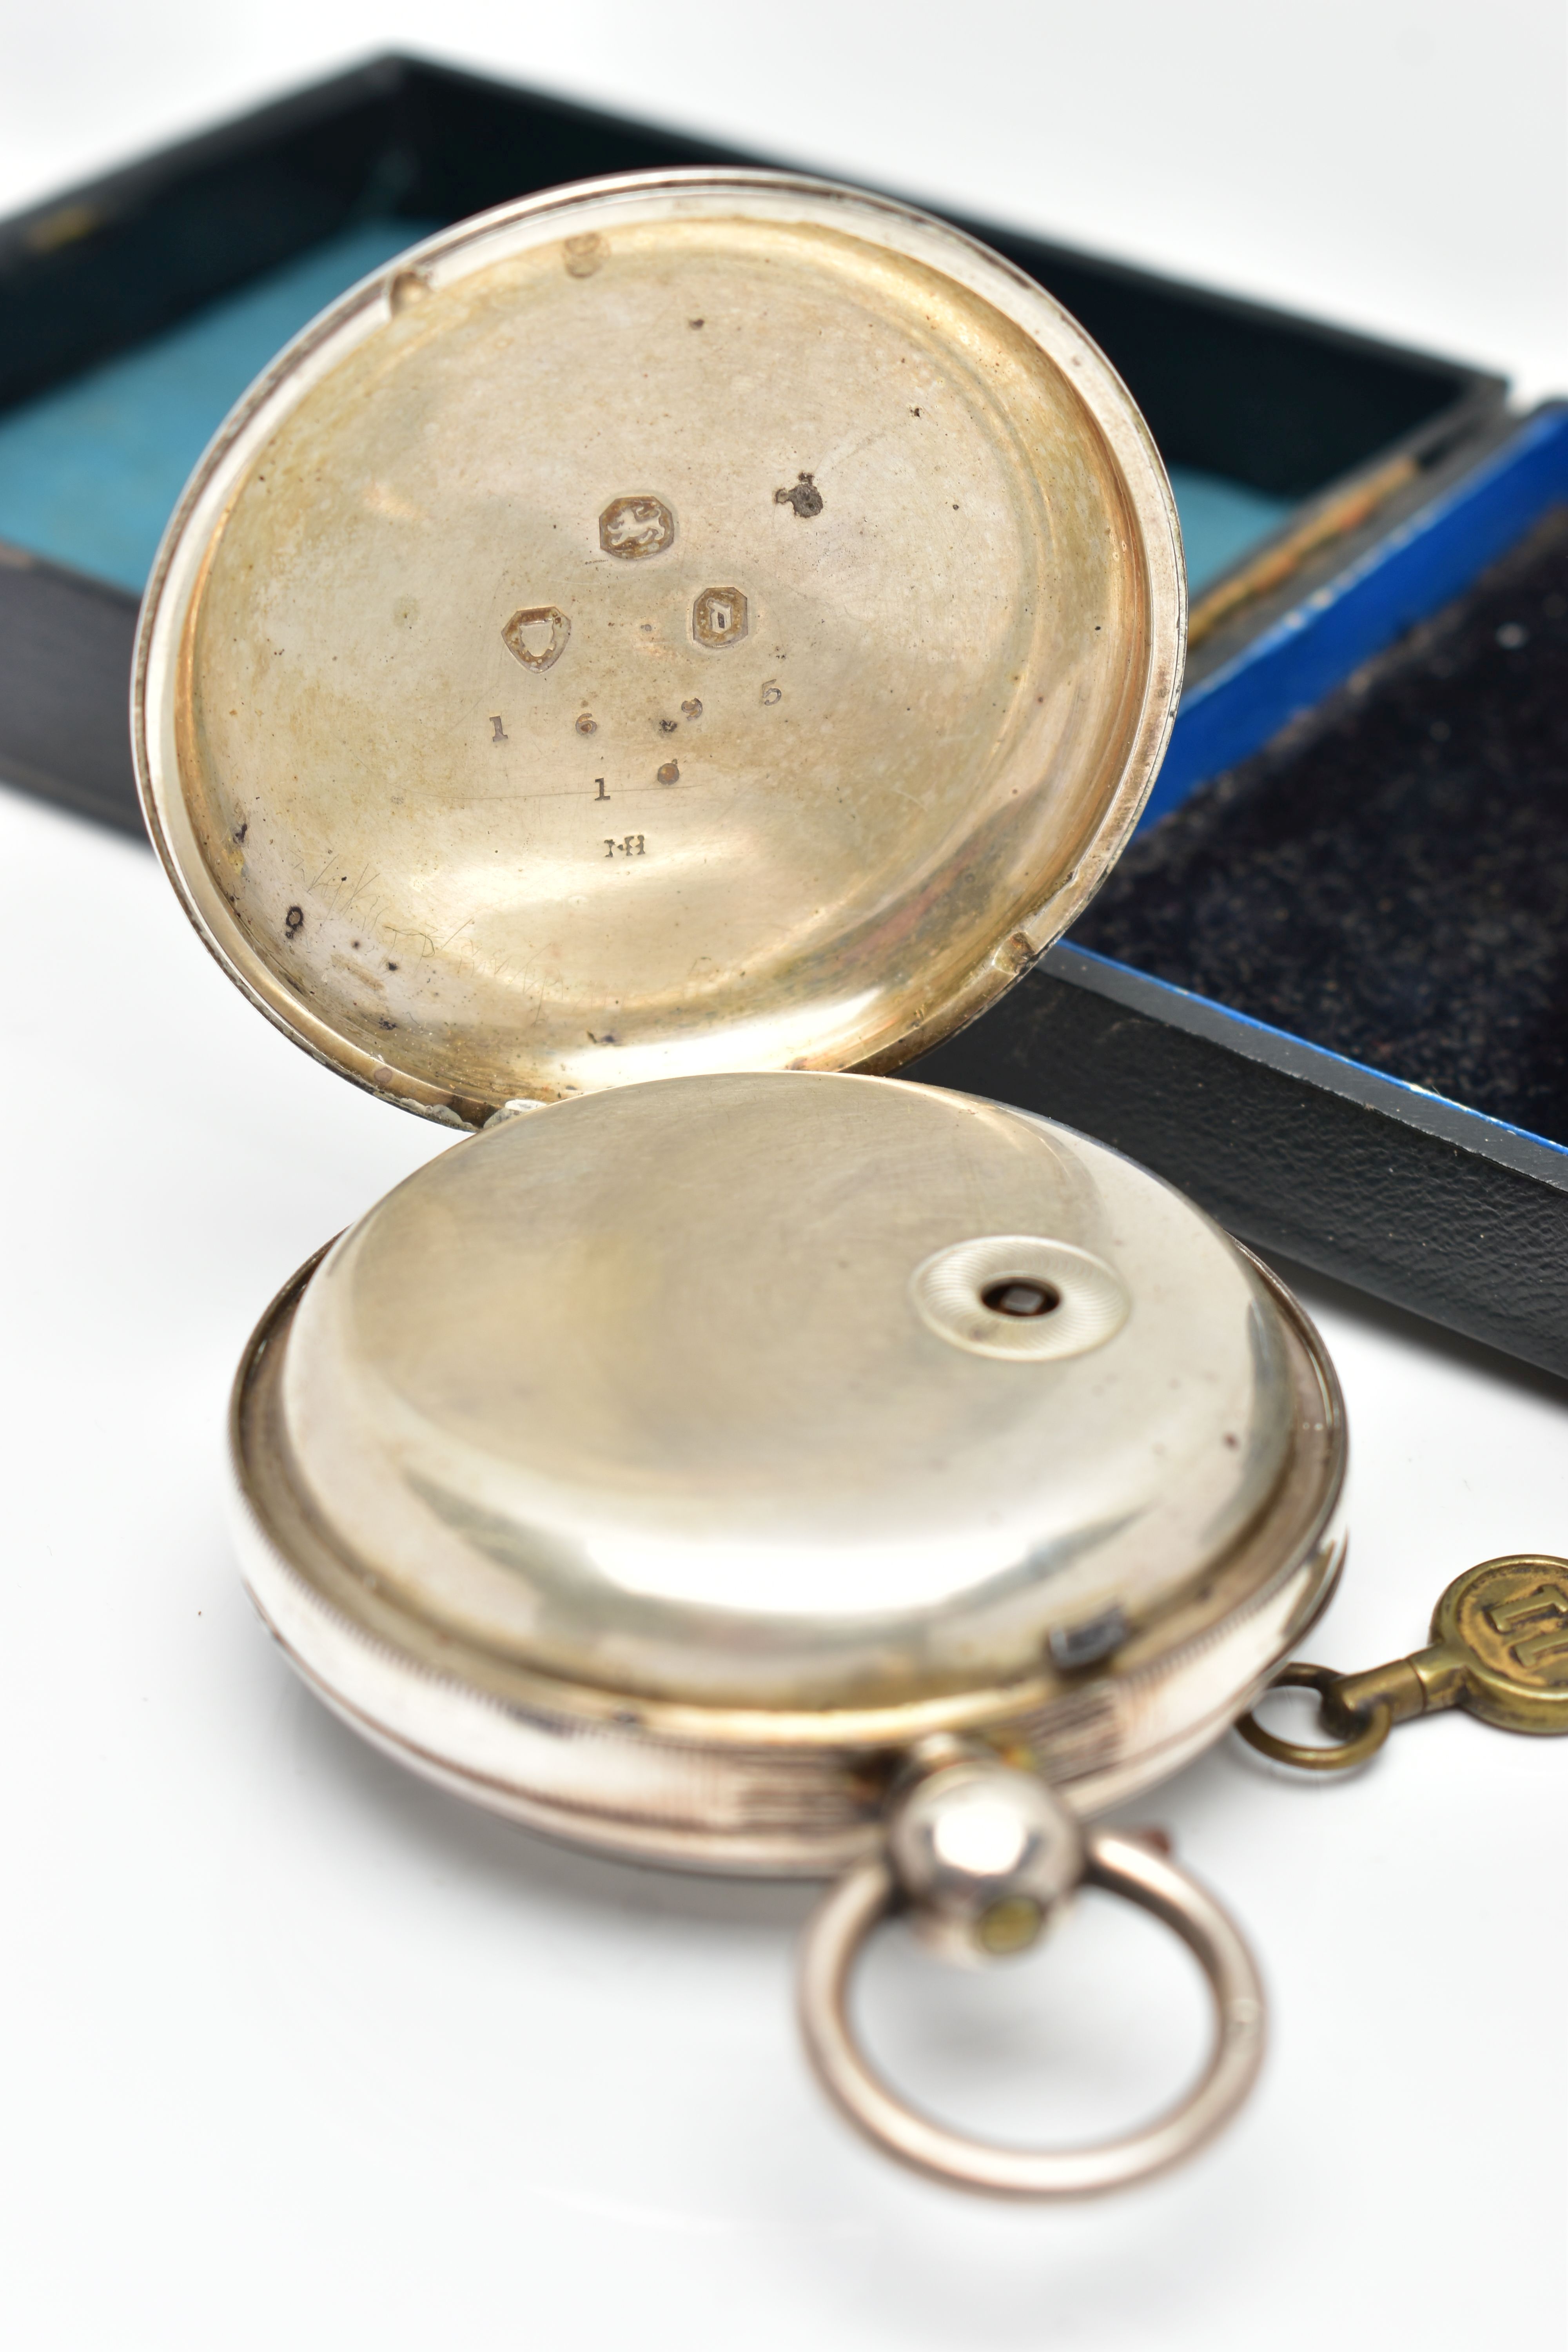 A CASED SILVER OPEN FACE POCKET WATCH, key wound, round cream dial signed 'Improved Patent', large - Image 4 of 8